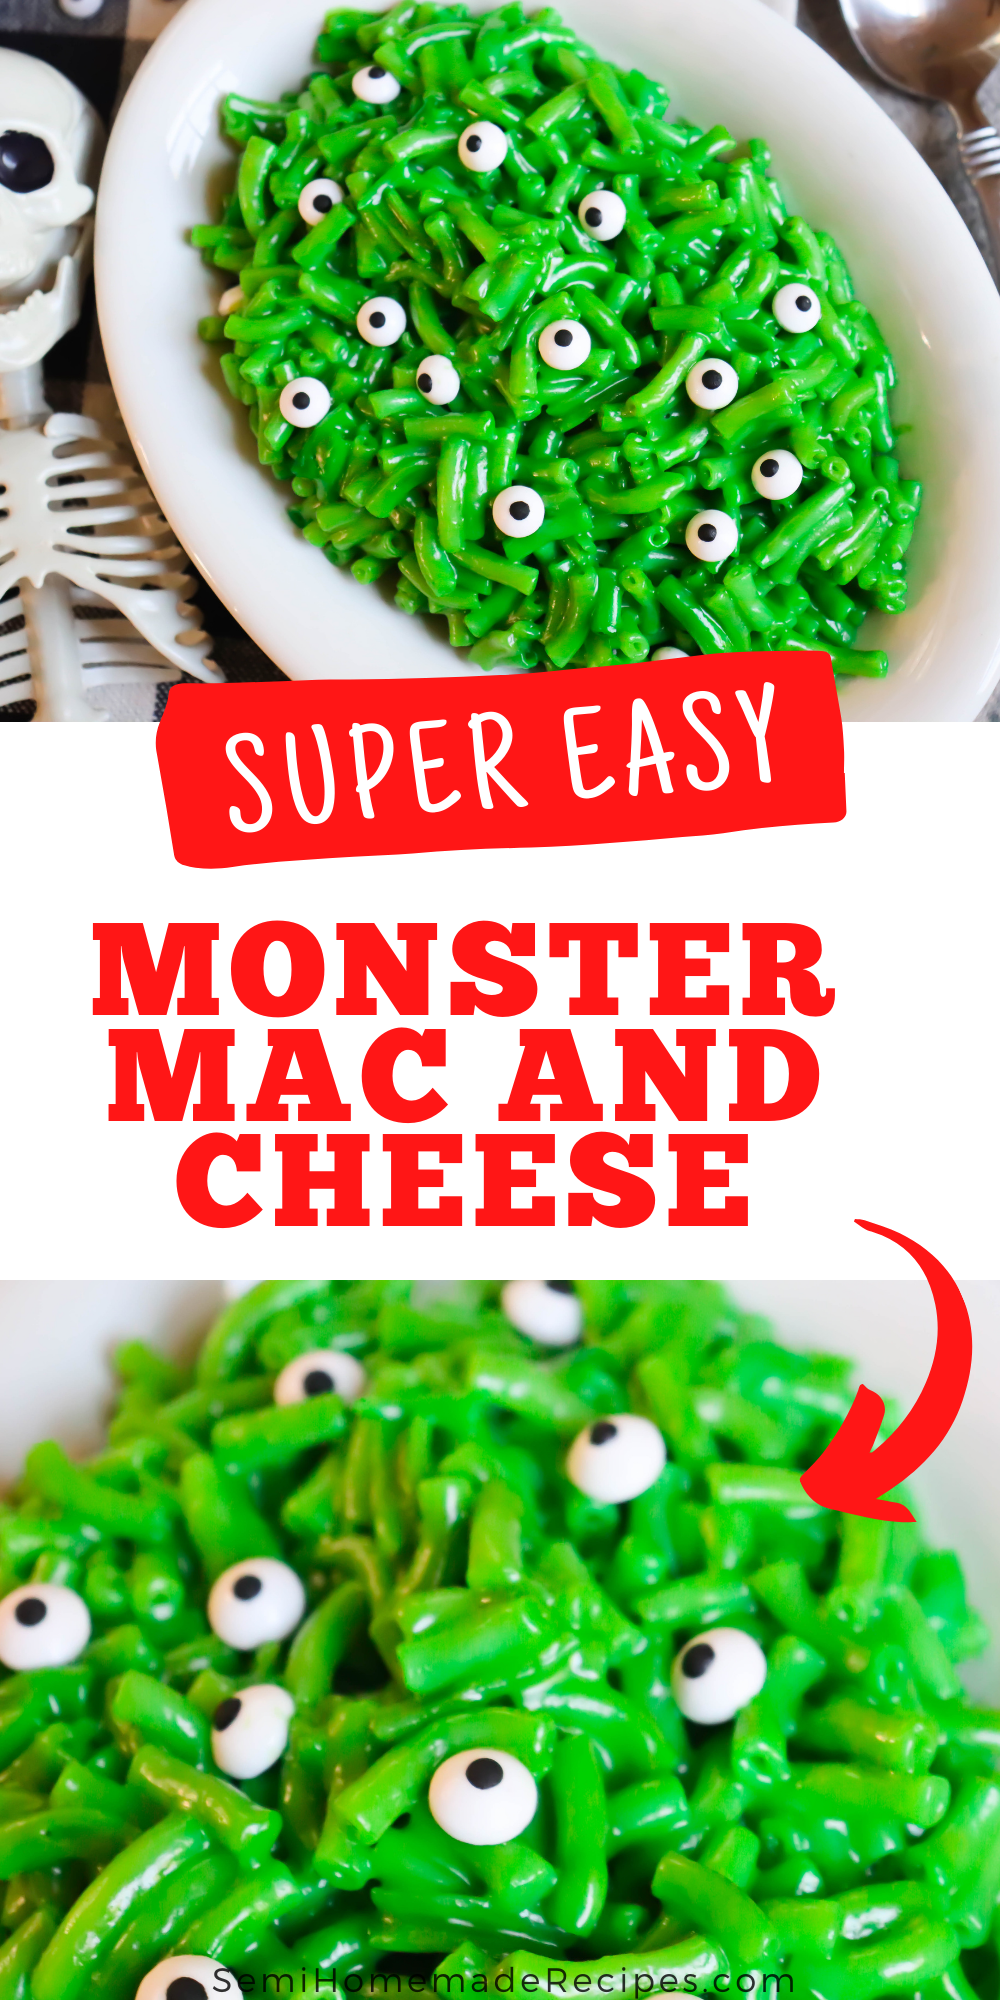 Monster Mac and Cheese - a semi homemade, fun and savory Halloween recipe using macaroni and cheese, green food coloring and candy eyes! This Monster Mac and cheese is the perfect Halloween lunch or Halloween dinner!